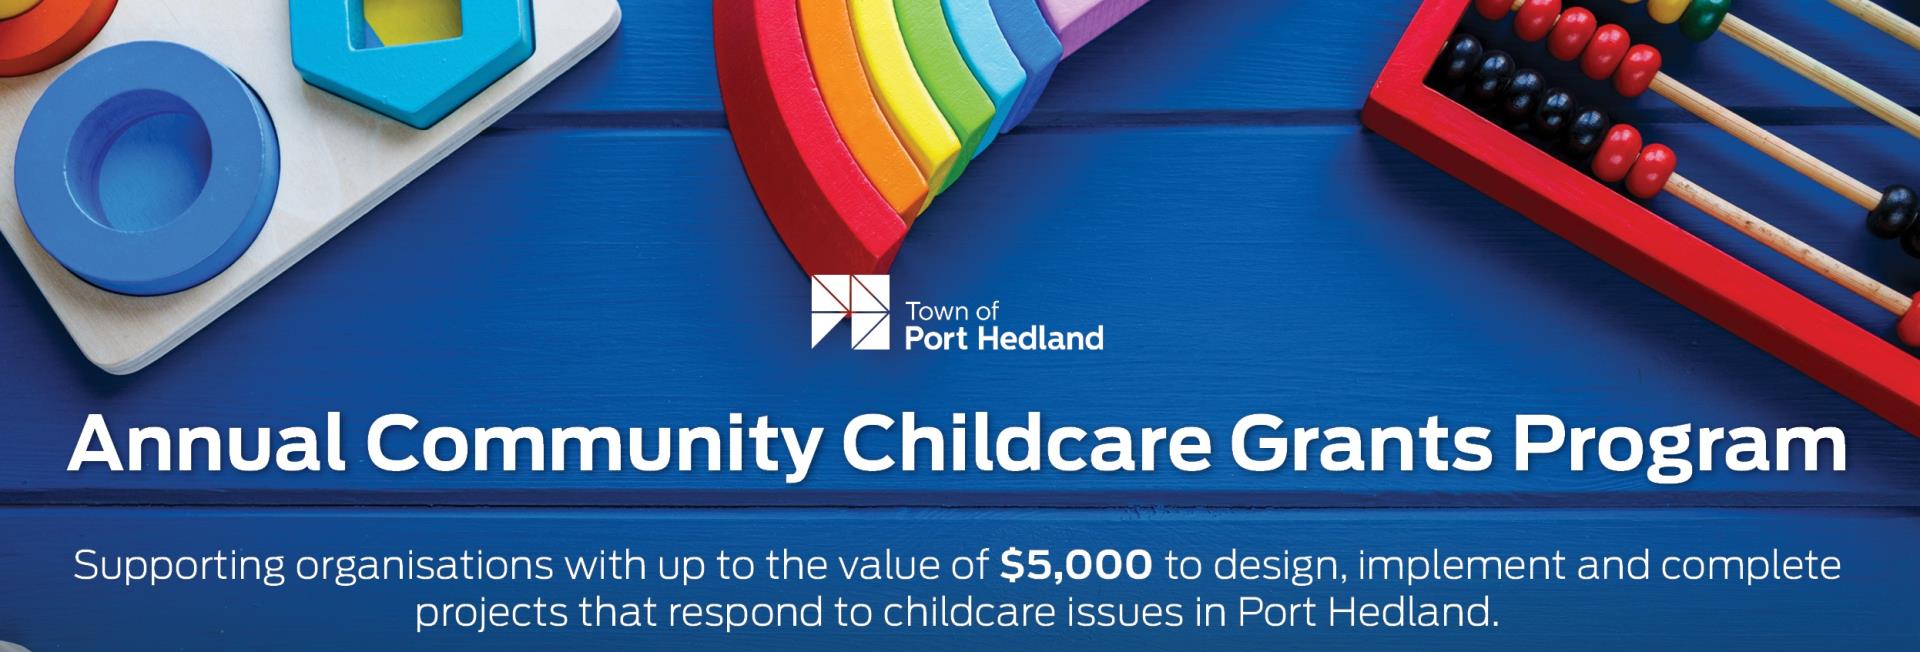 Annual Childcare Grants Program » Town of Port Hedland